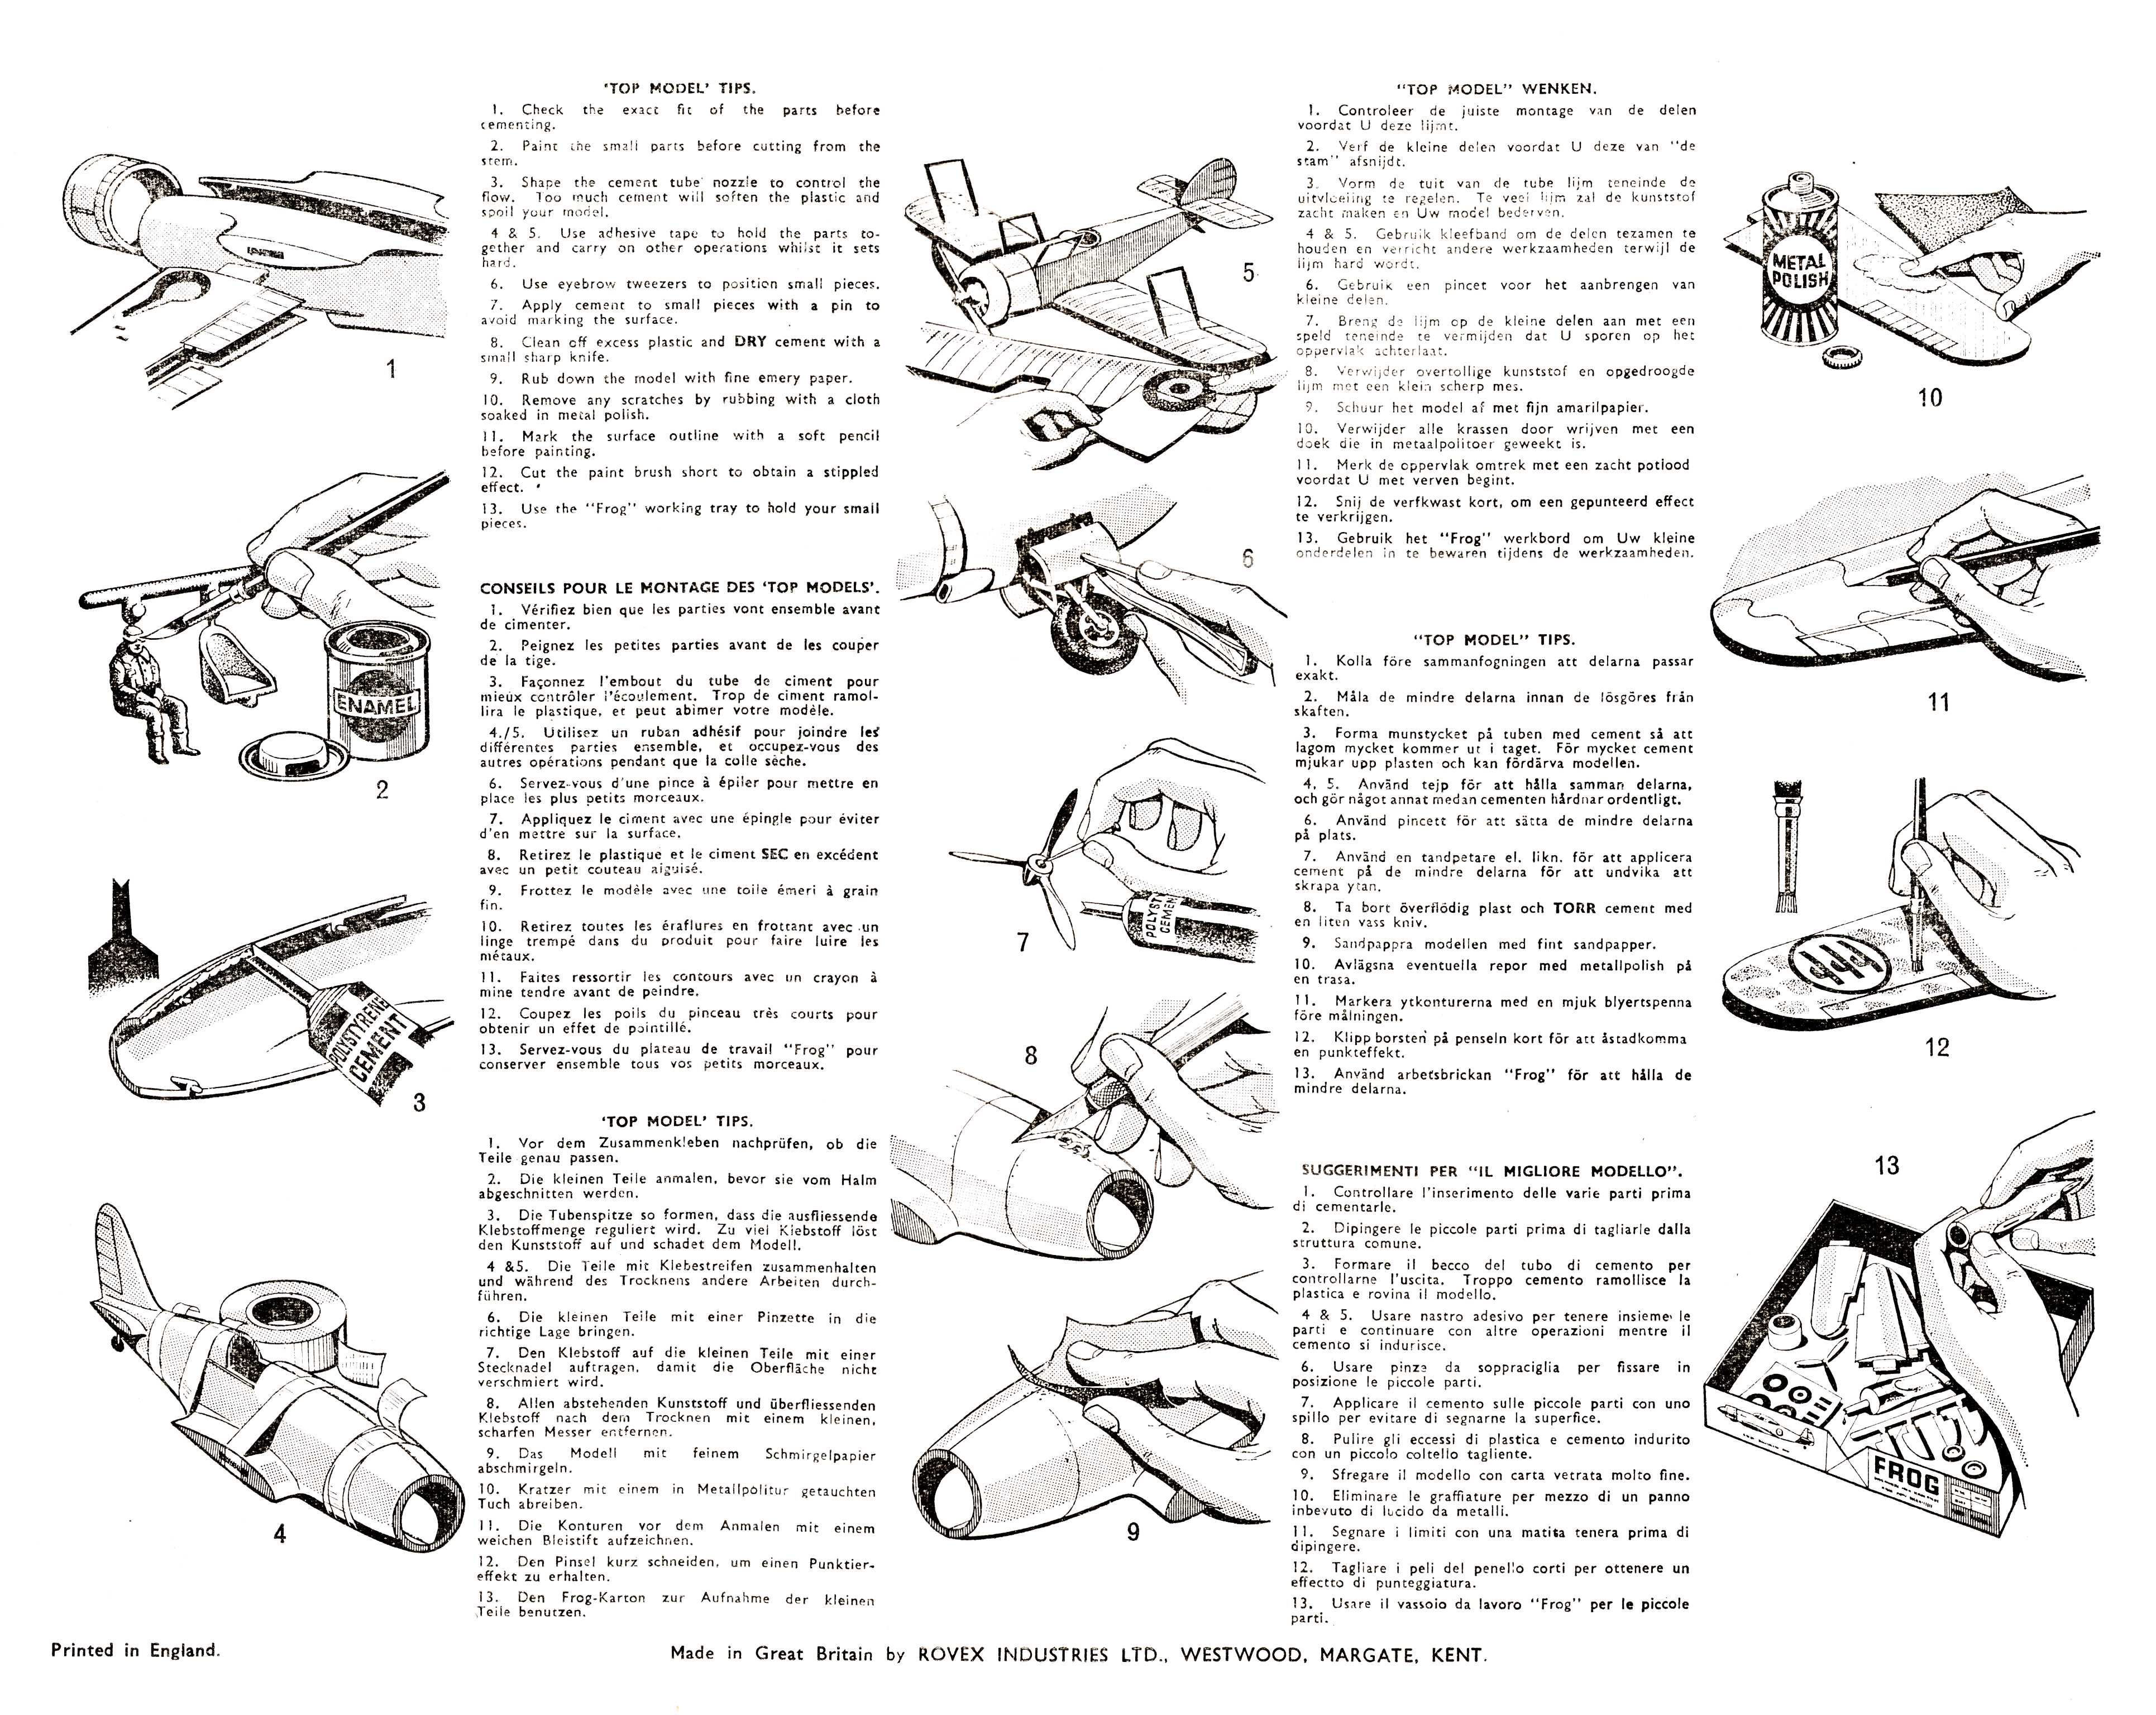 FROG F341 Percival Proctor IV Trainer, Black series, Rovex Ind Ltd 1968, assembly instructions